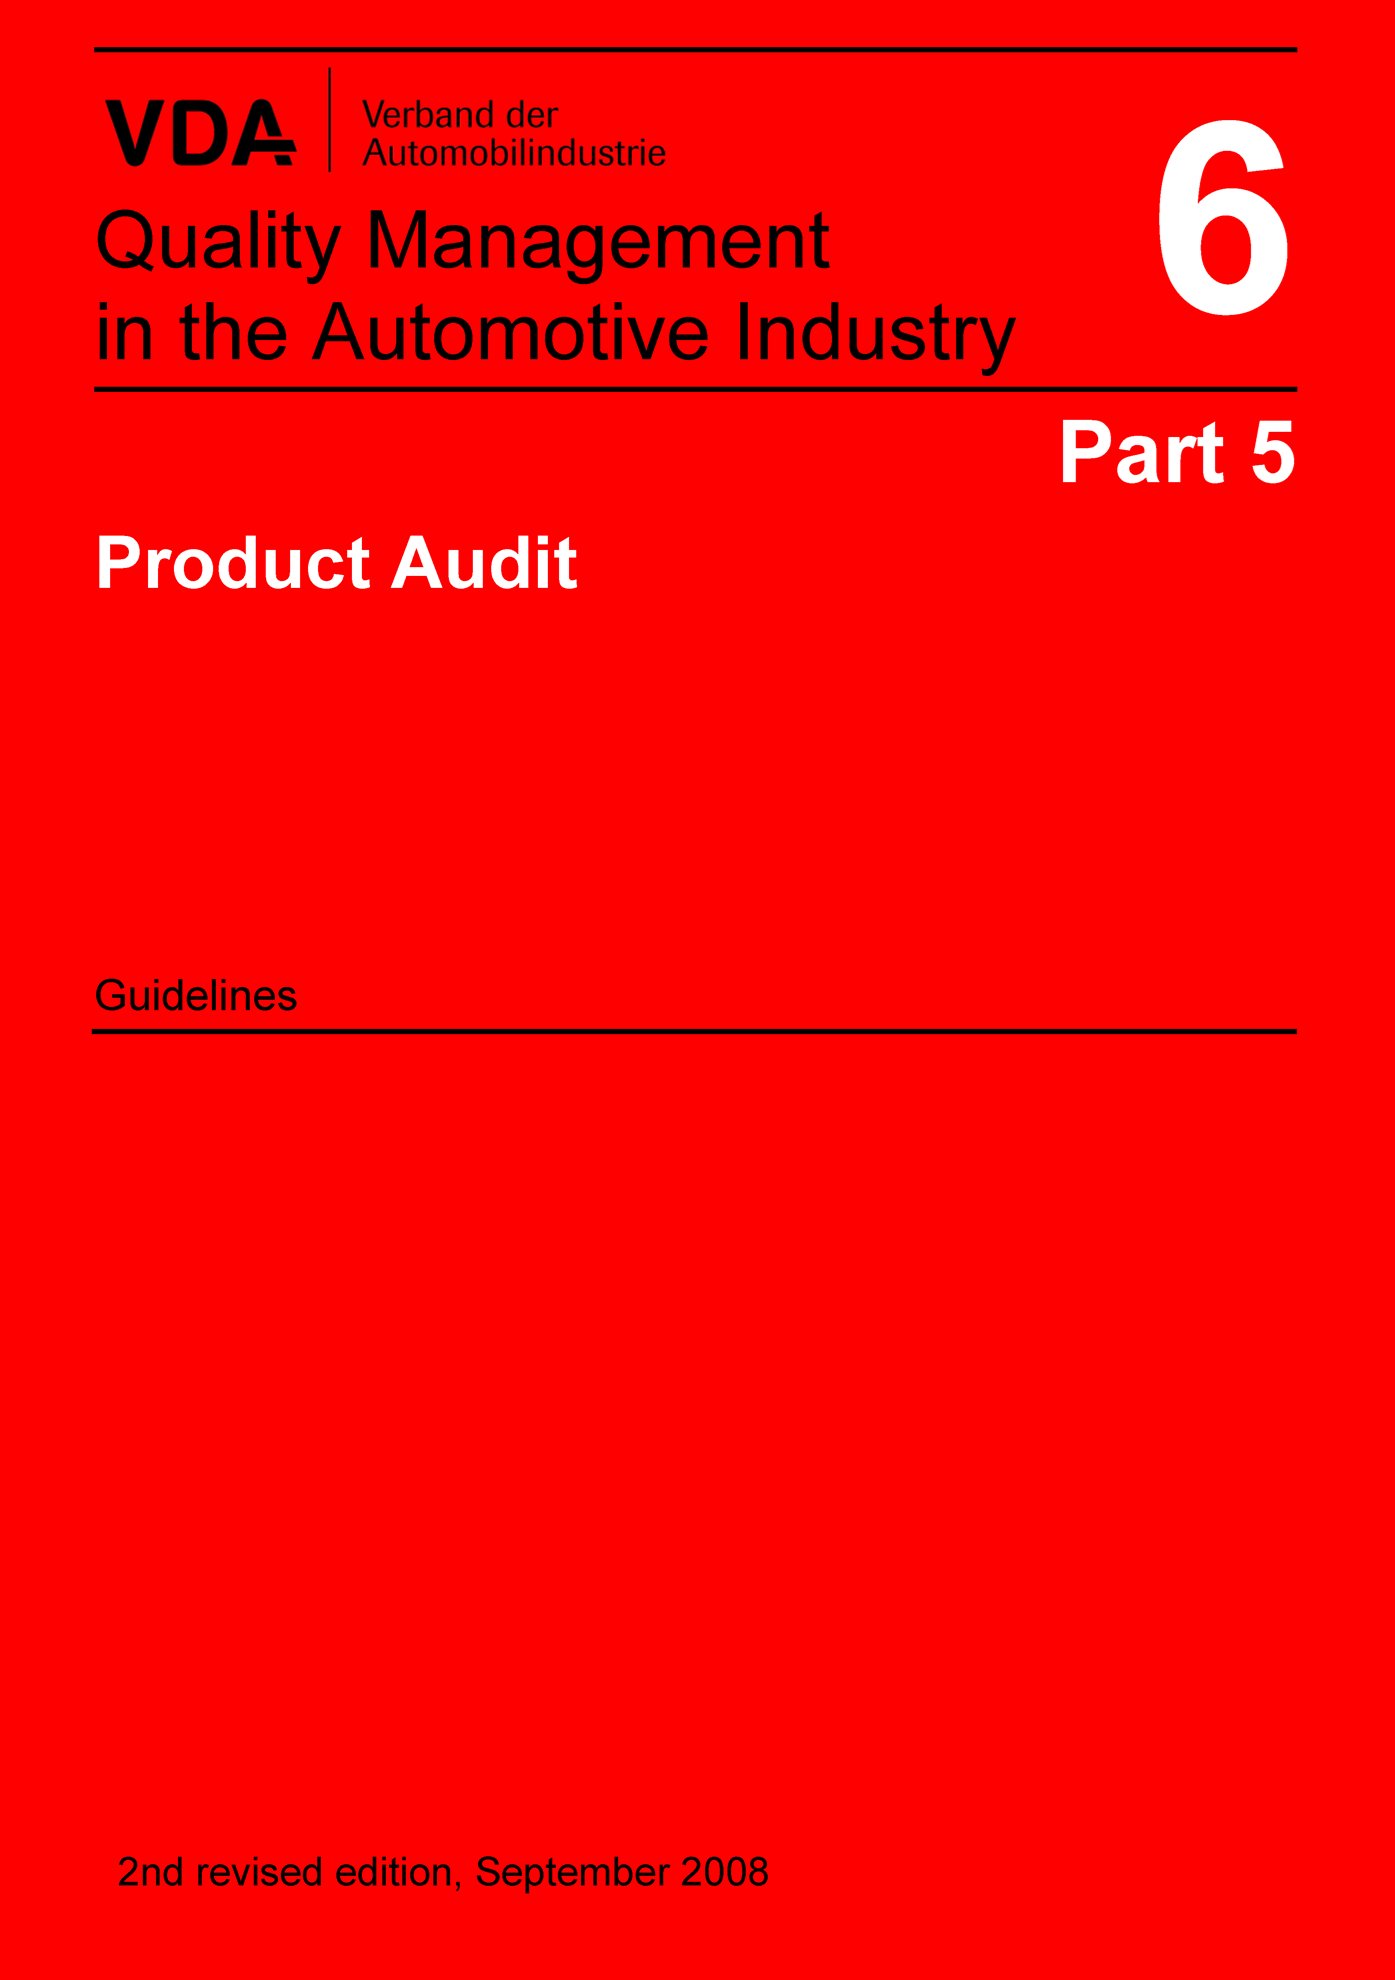 VDA Volume 6 Part 5 Product Audit / 2nd edition 2008 1.1.2008